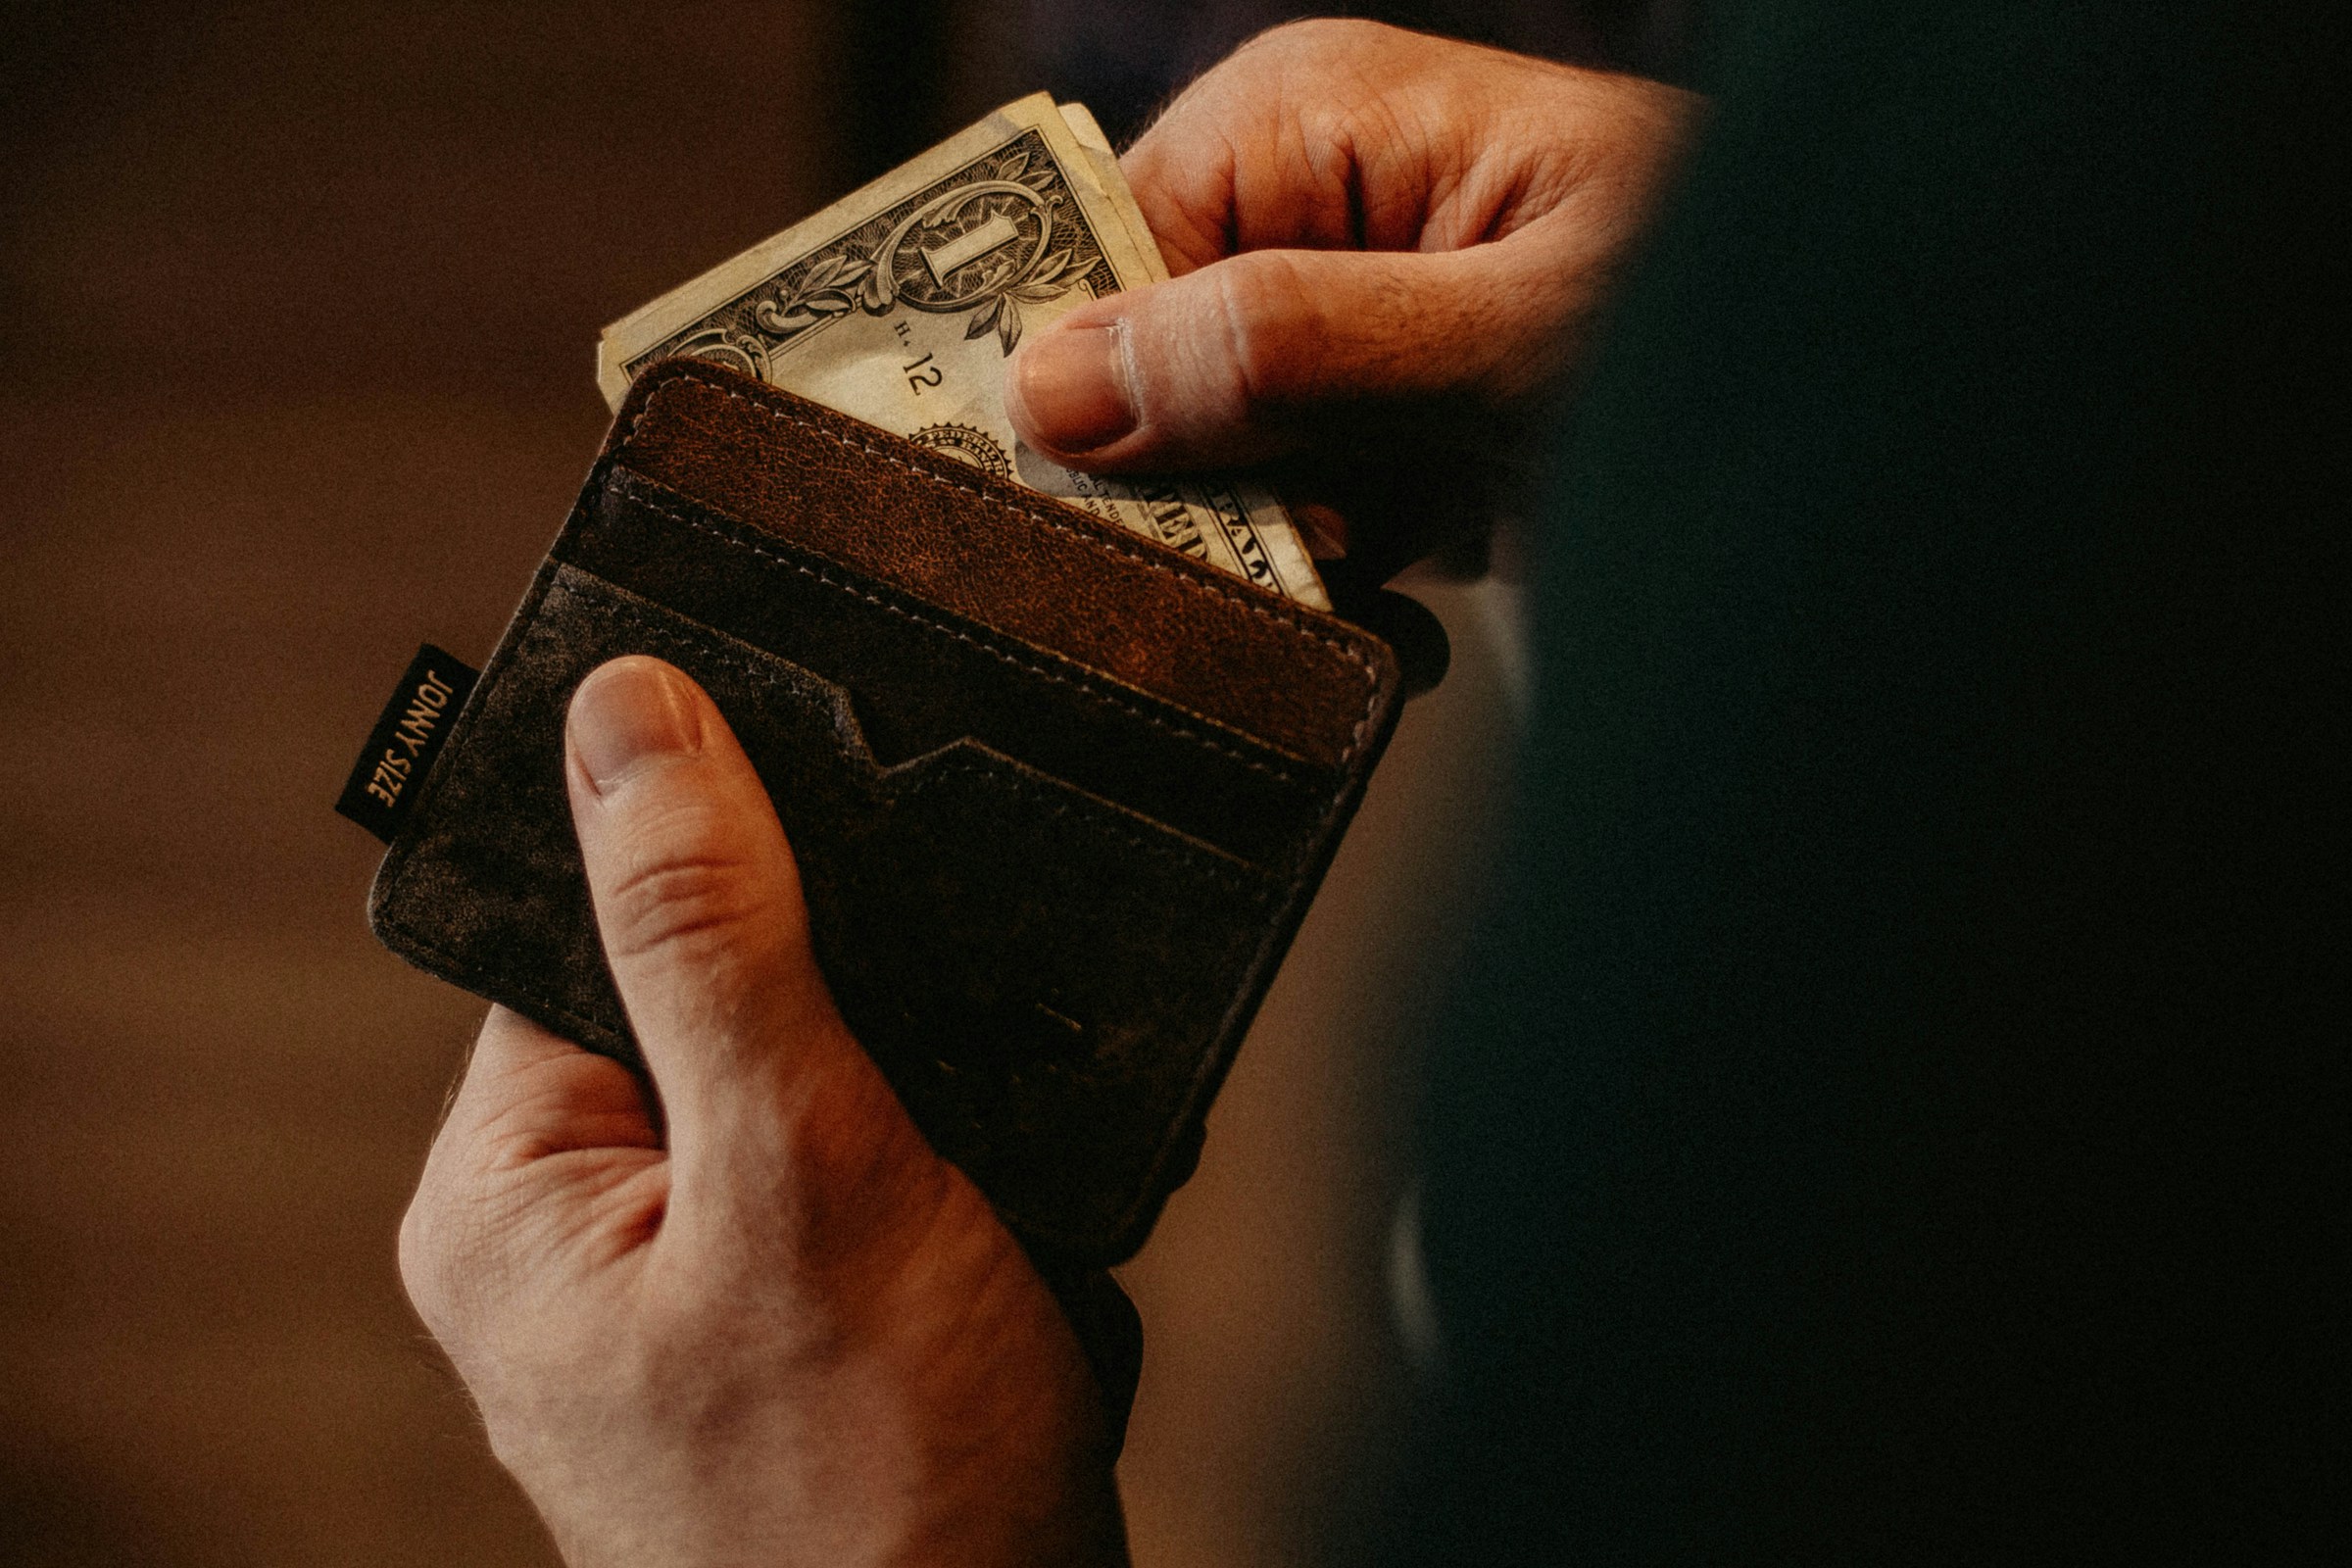 A man opening his wallet | Source: Unsplash